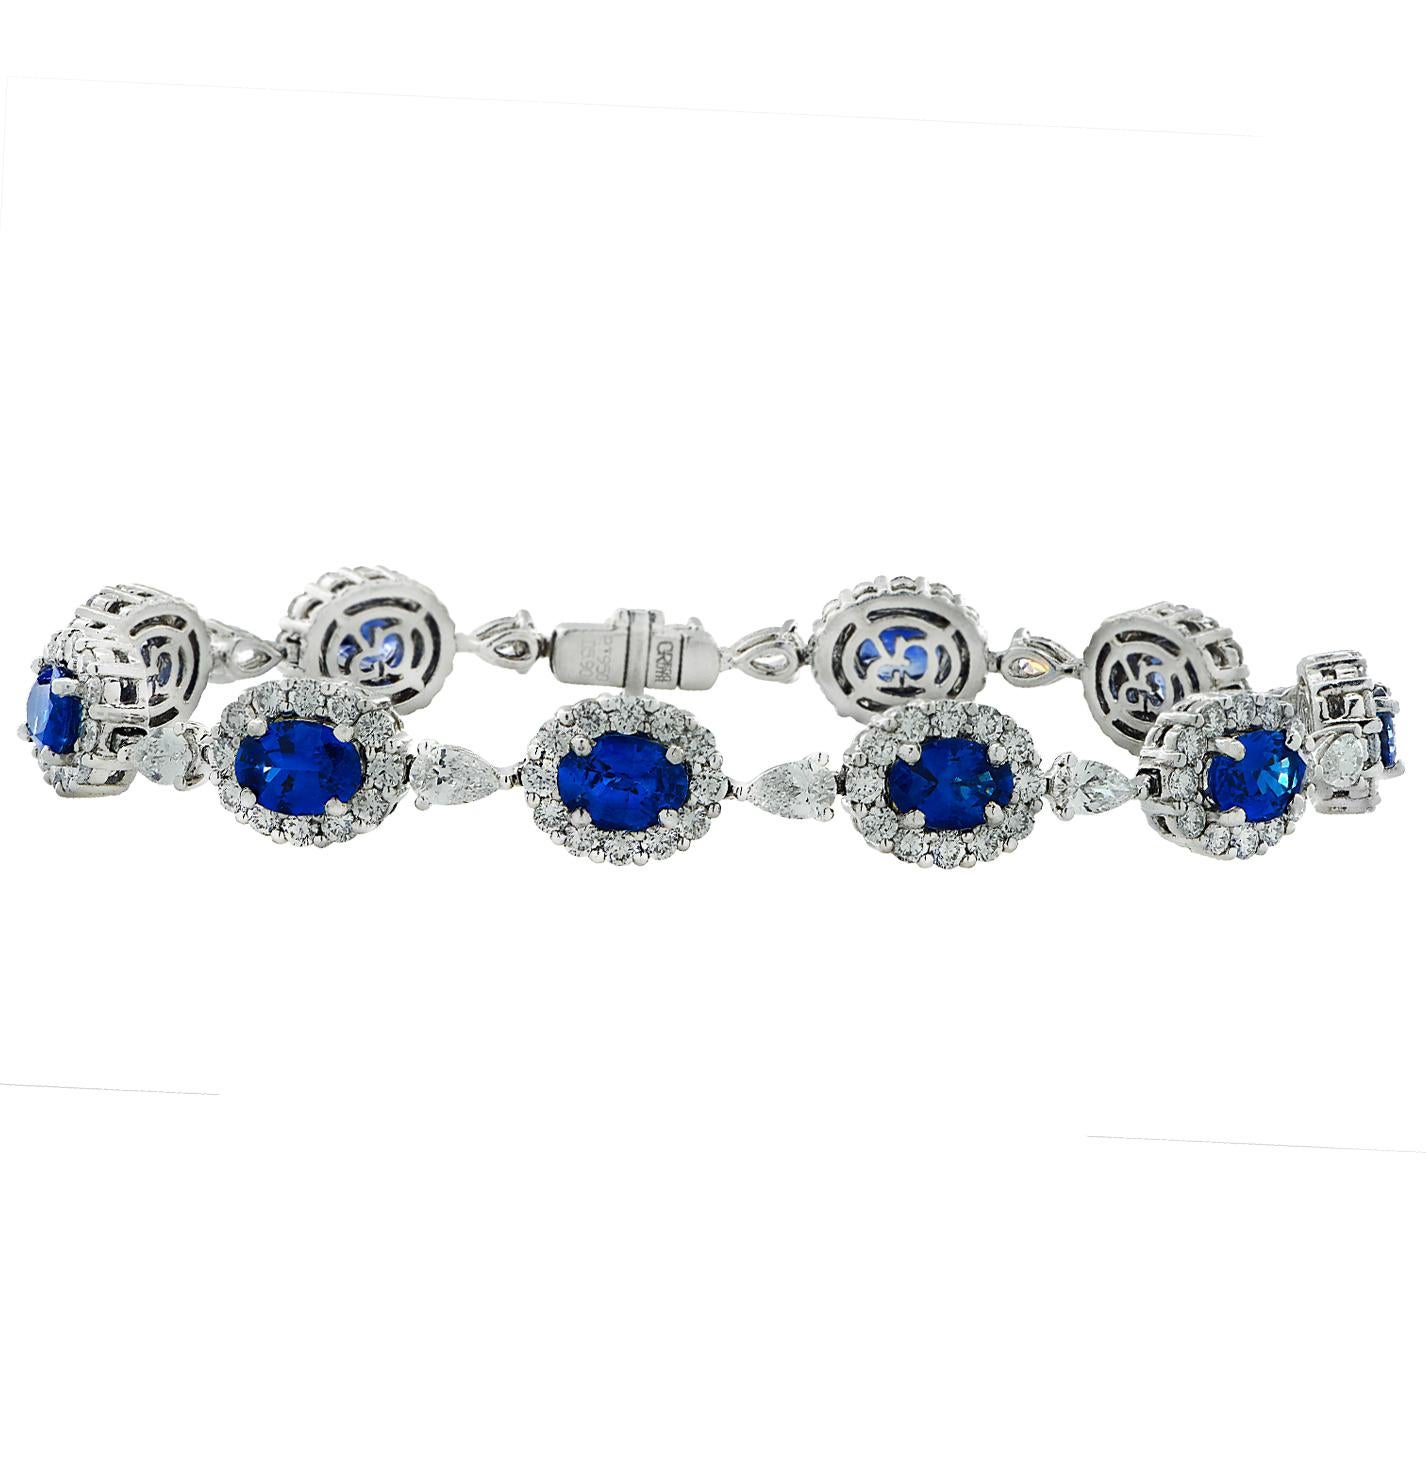 Stunning Gregg Ruth Diamond and Sapphire bracelet crafted in platinum, featuring 13 oval sapphires weighing approximately 5.90 carats total, 13 pear shape diamonds and round brilliant cut diamonds weighing approximately 5.90 carats total, G-H color,